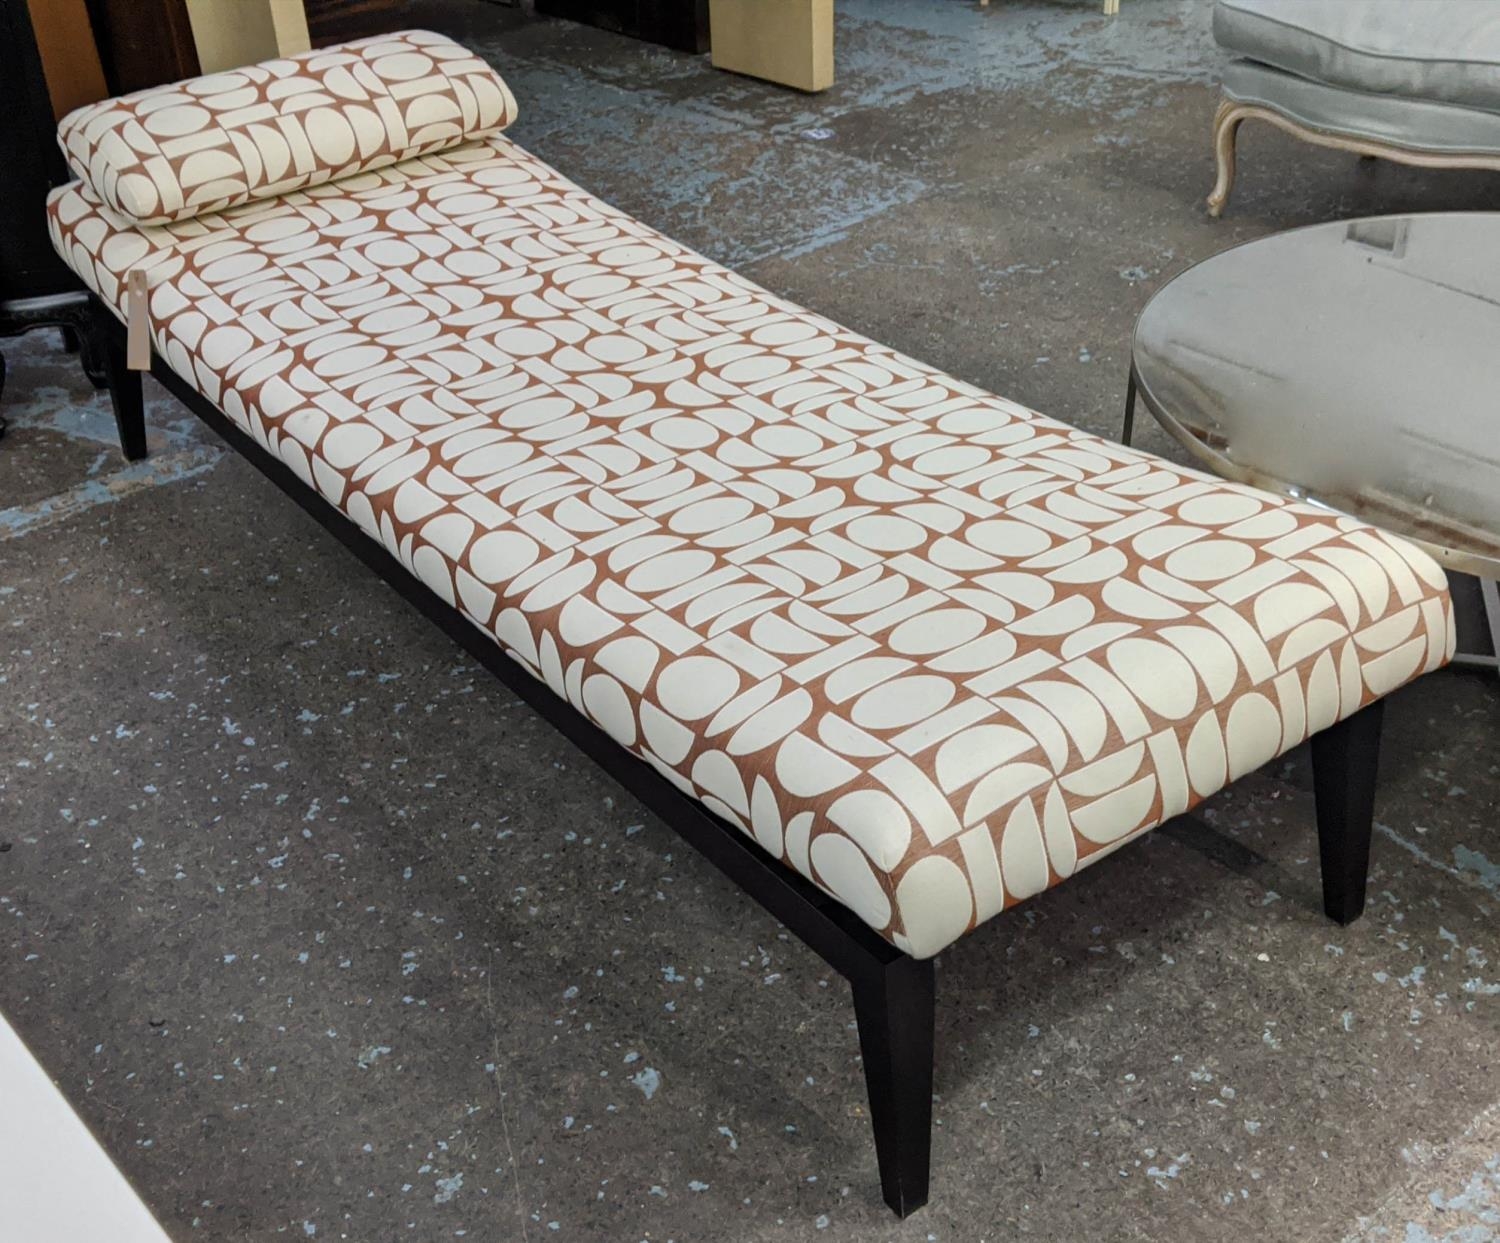 FENDI CASA CHAISE LOUNGE, in a later Lelievre Fjord fabric upholstery, 200cm x 70cm x 60cm.